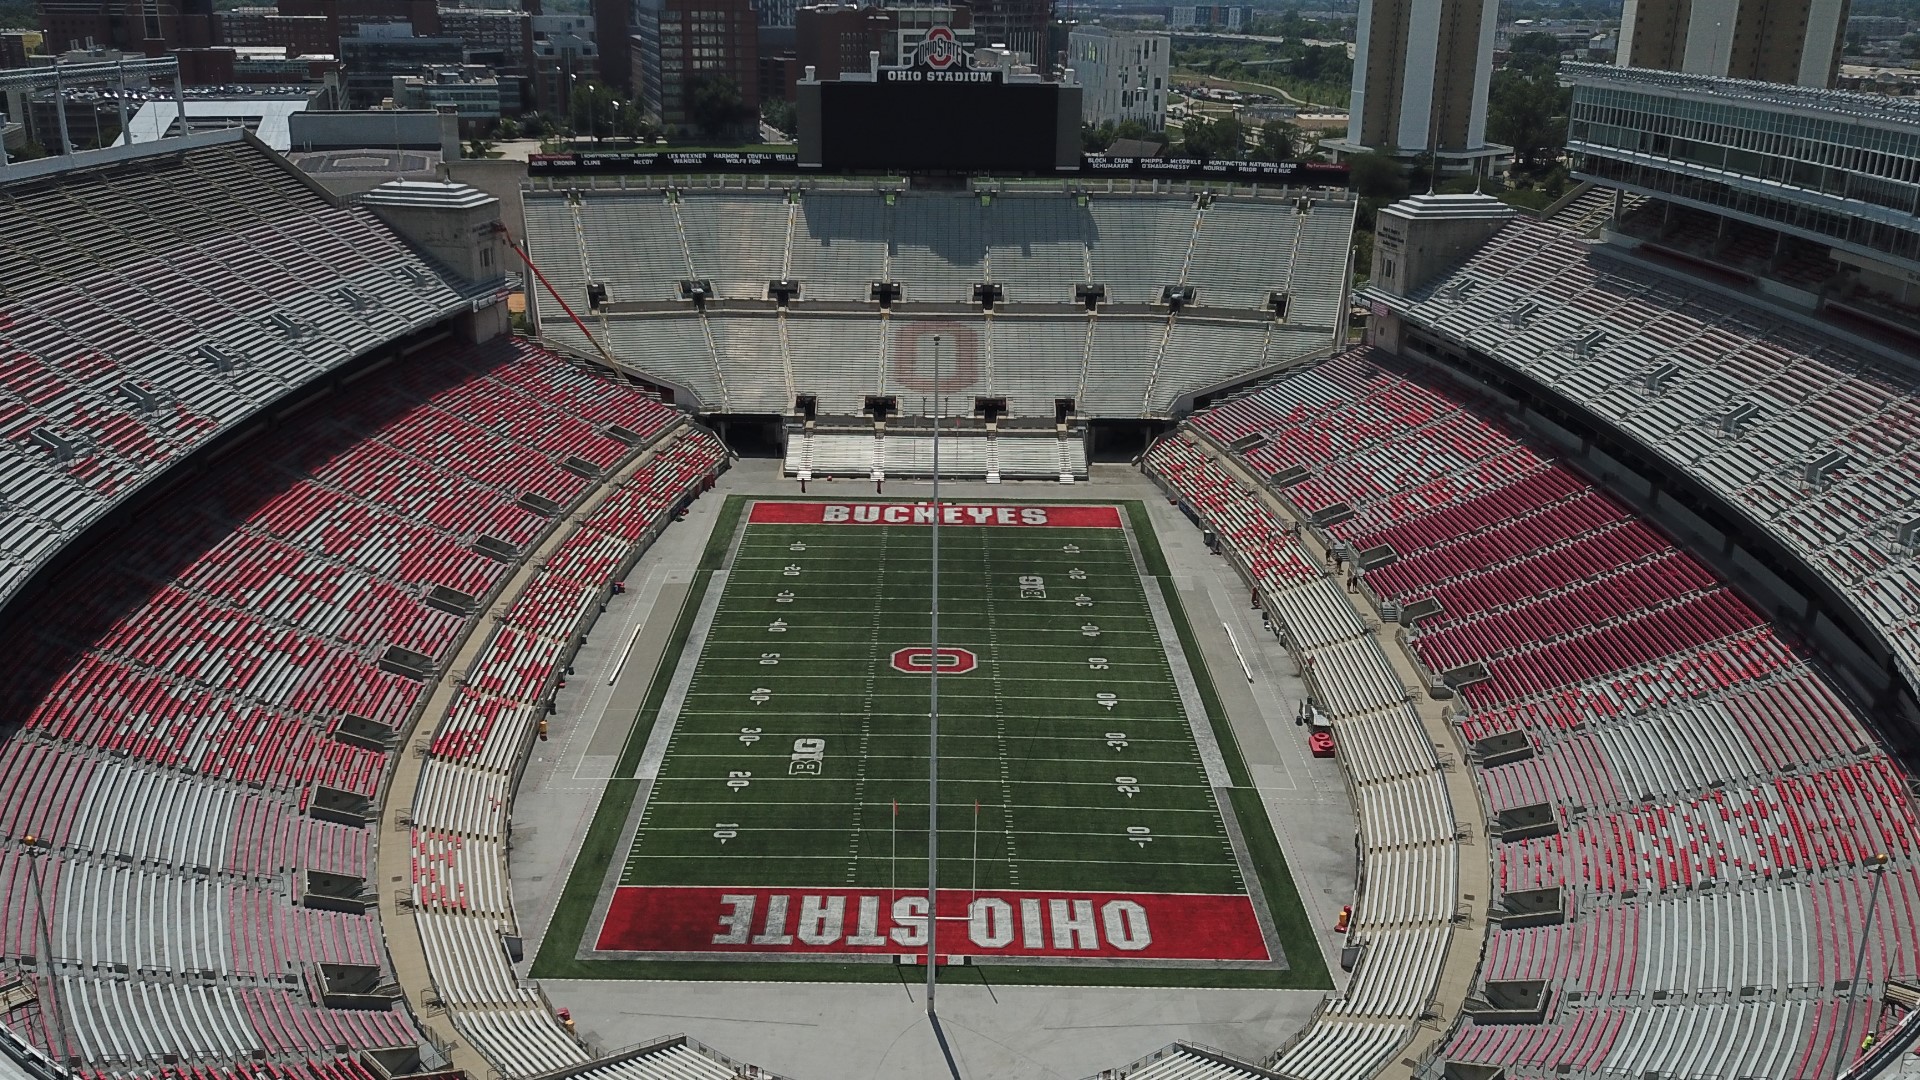 The playing field will now include two white Safelite logos opposite the Big Ten logos.